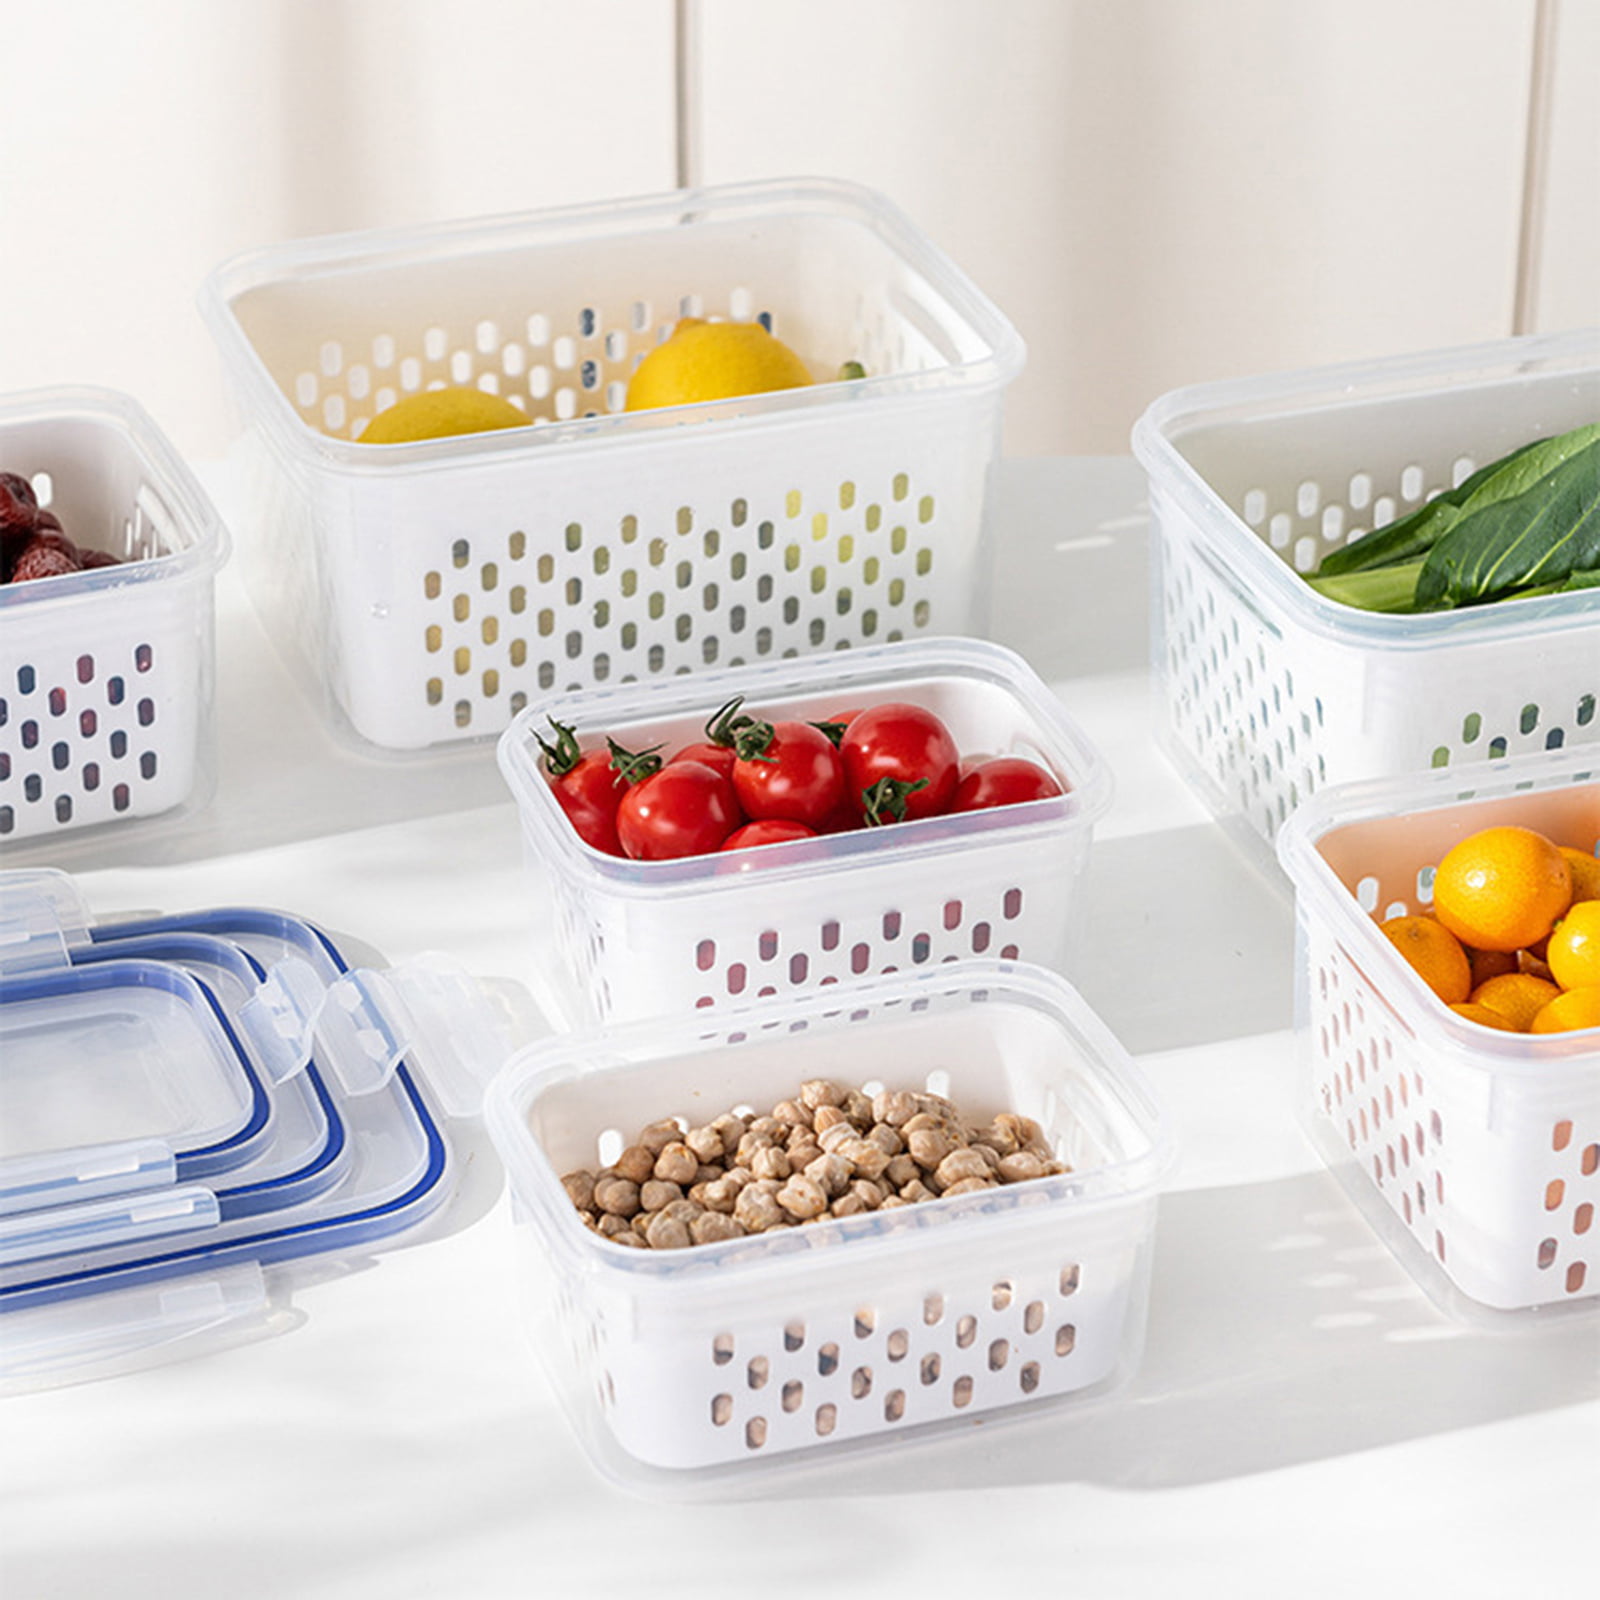 Reusable Detachable Flat Skinny Stack Containers Food Preservation Tray  Fresh Storage Container for Store Vegetables/Fruits/Meat